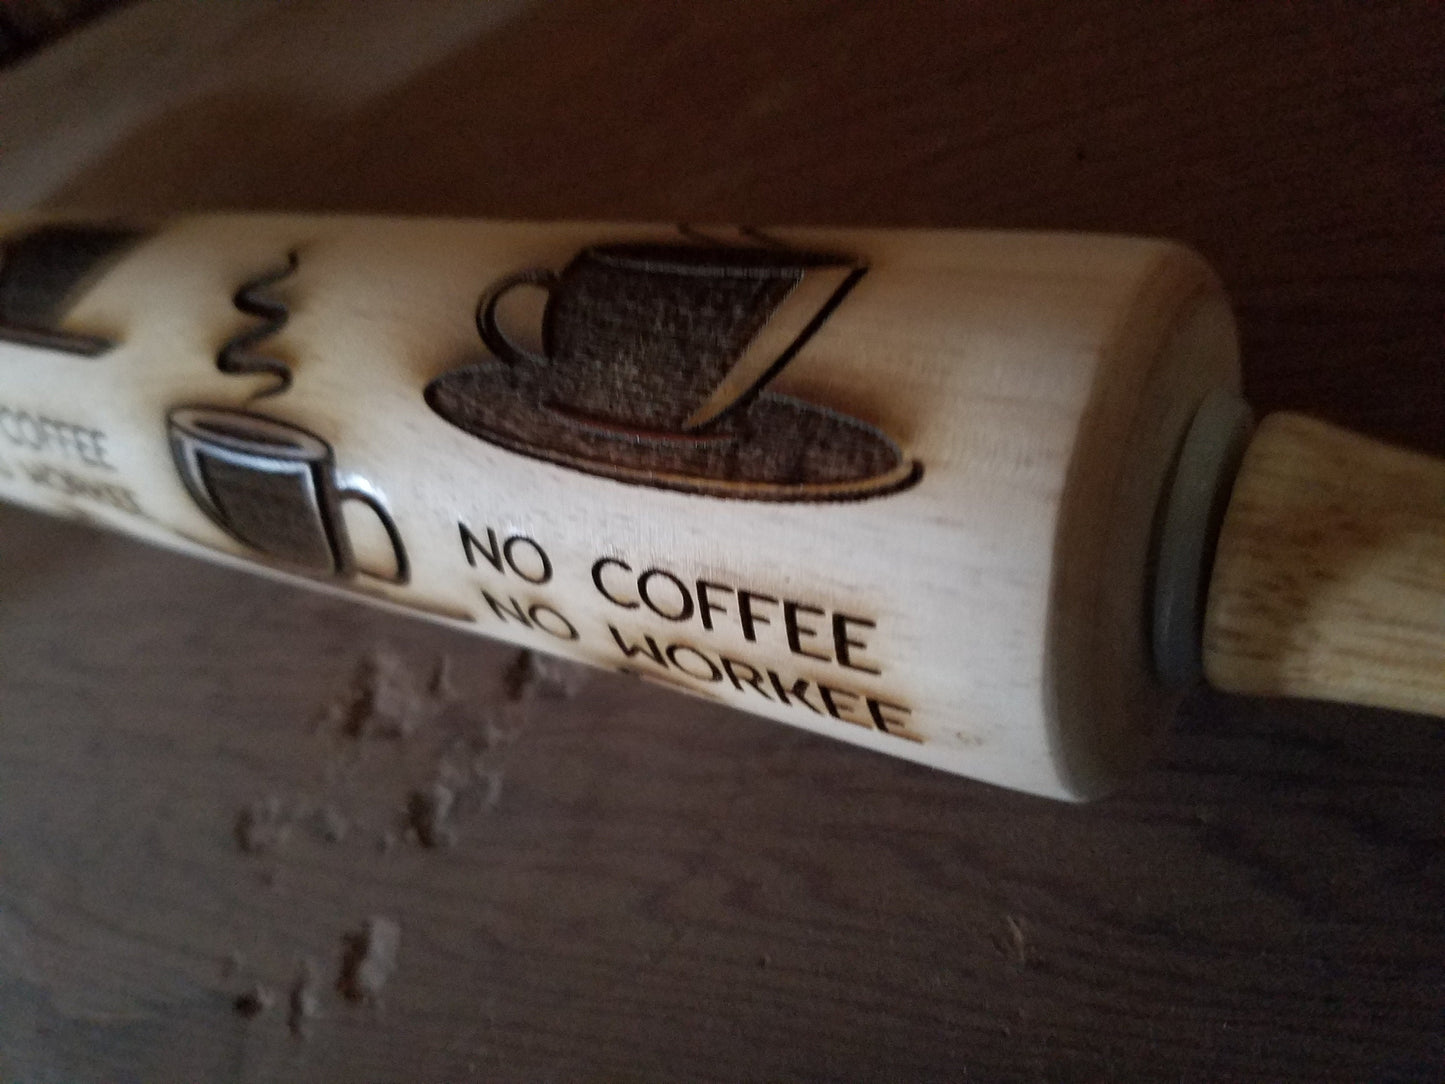 No Coffee No Workee, Work, Pottery Stamp, Rolling Pin, Embossed, Engraved, Wooden Rolling Pin, Cookie Stamp, Hardwood 10 inch, pottery